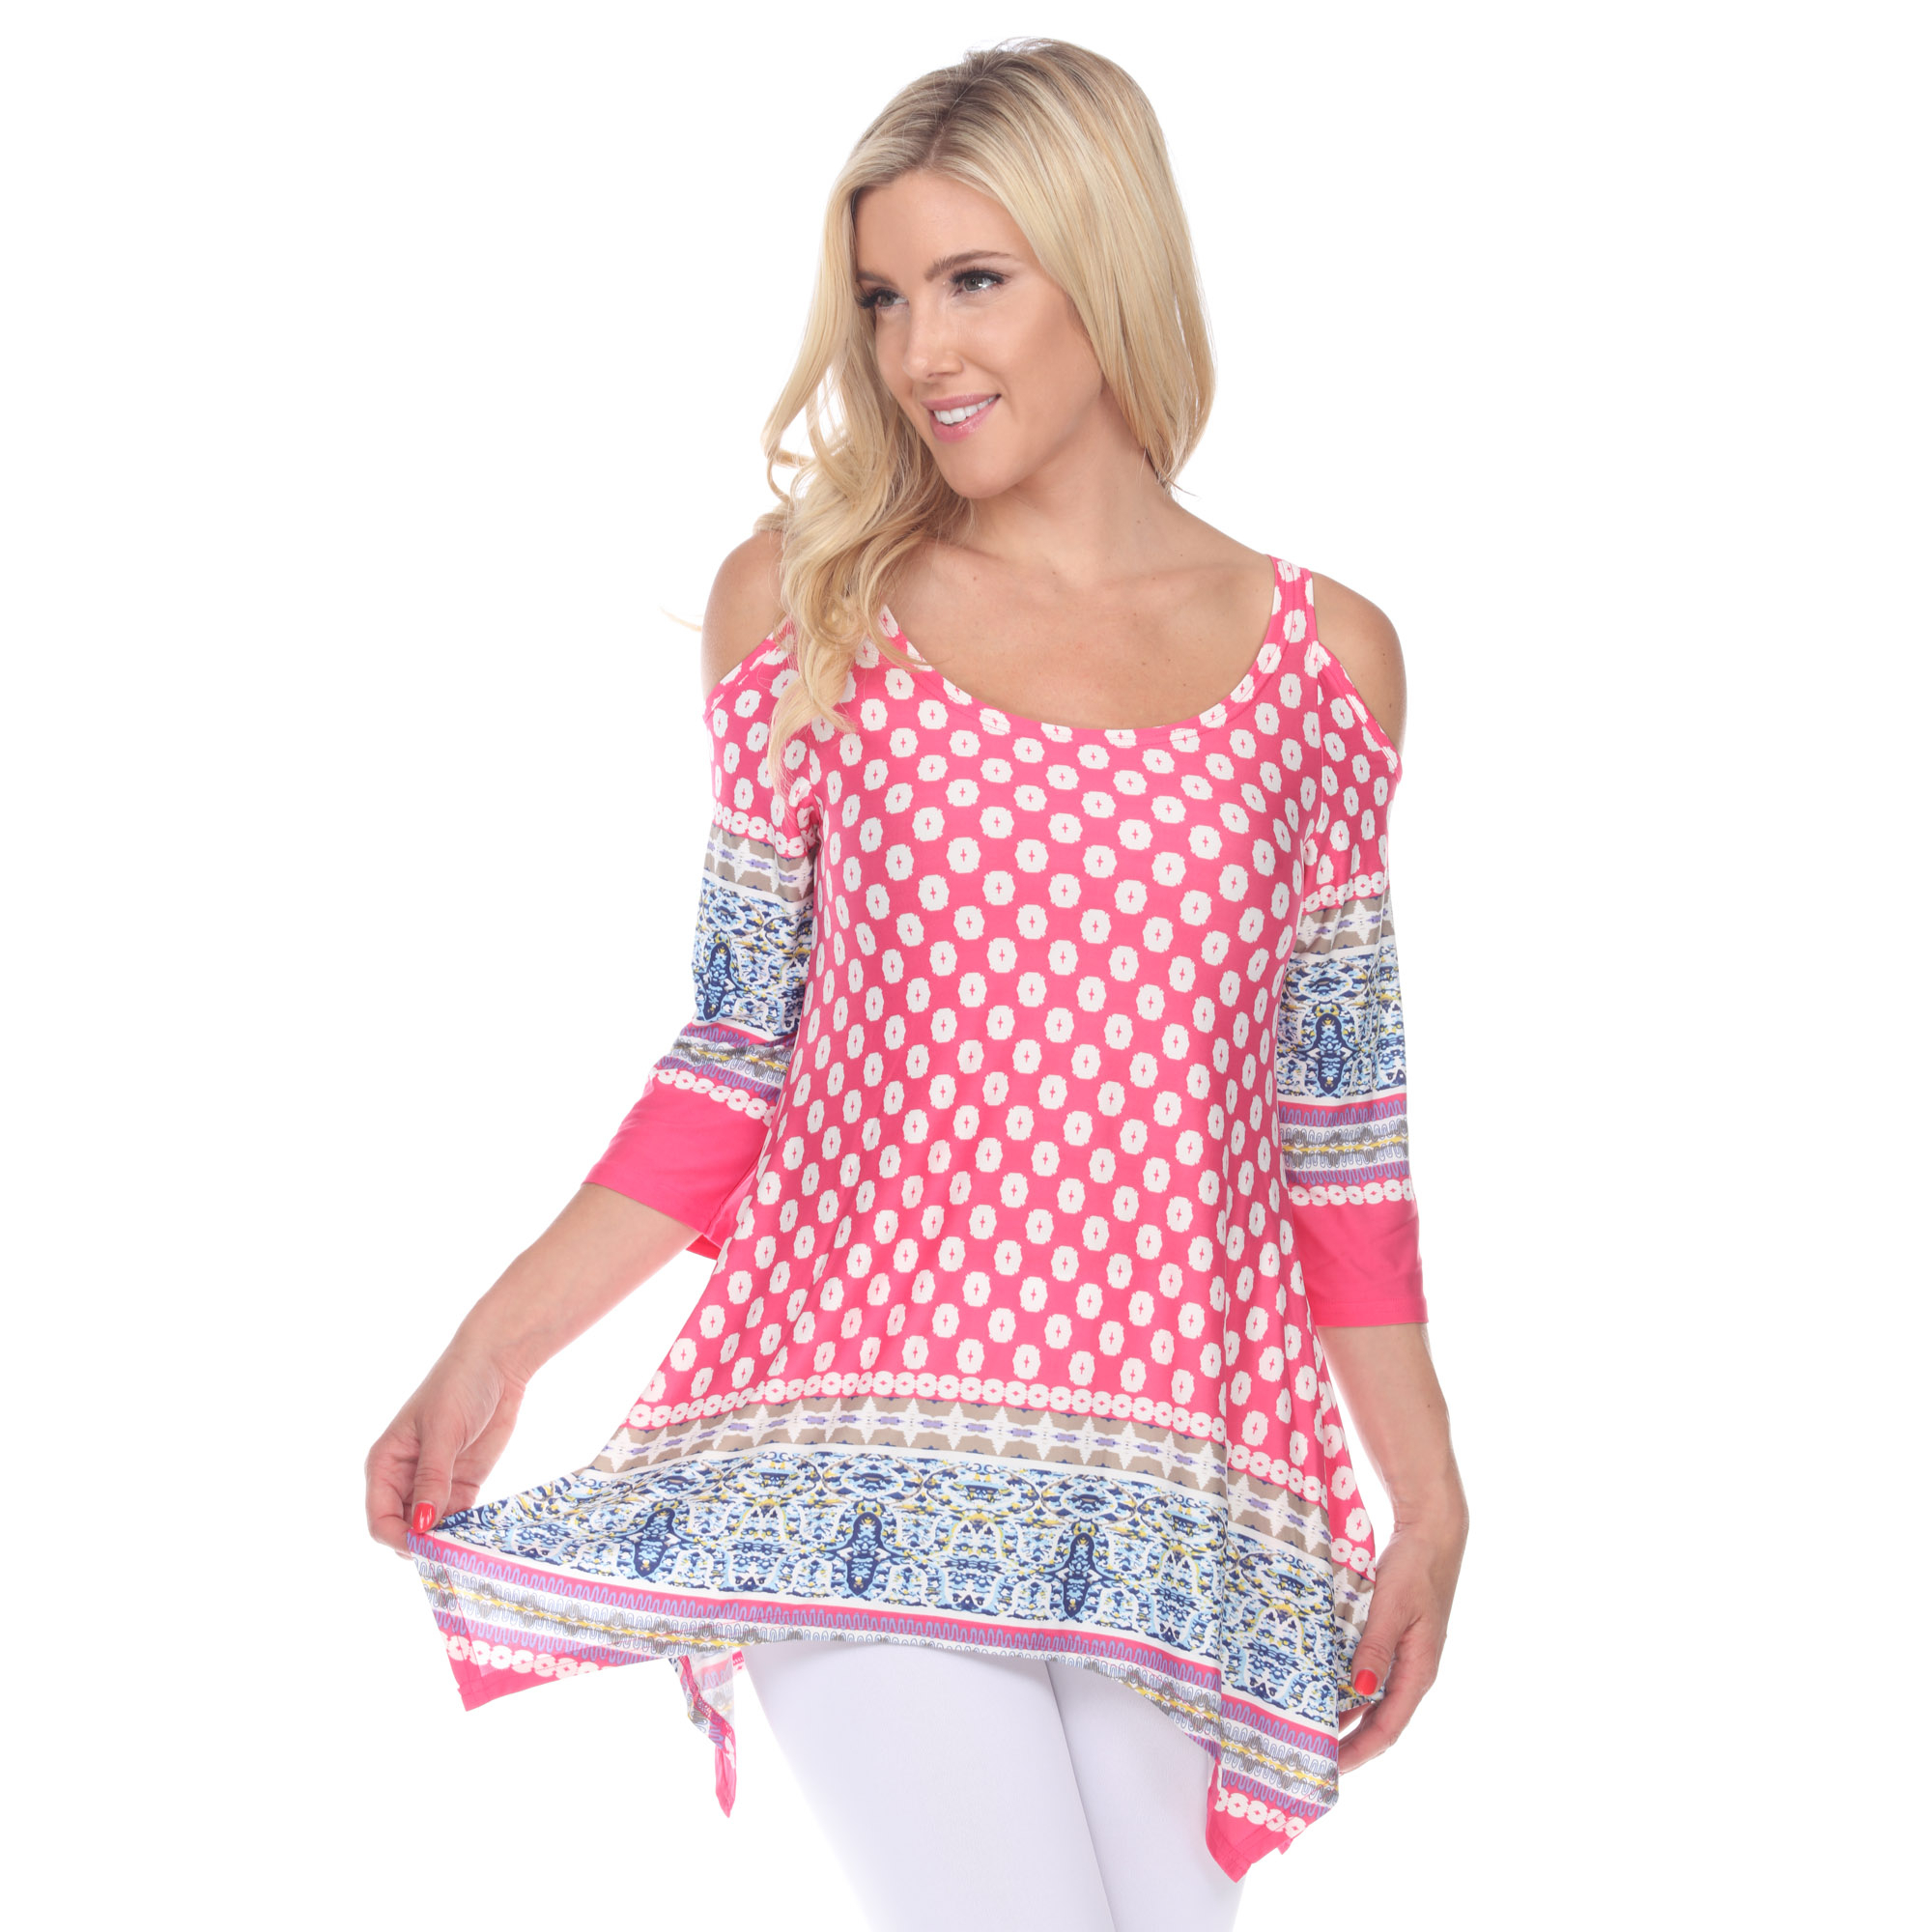 White Mark Women's Cold Shoulder Quarter Sleeve Printed Tunic Top With Pockets - Pink/White Polka Dots, 3X